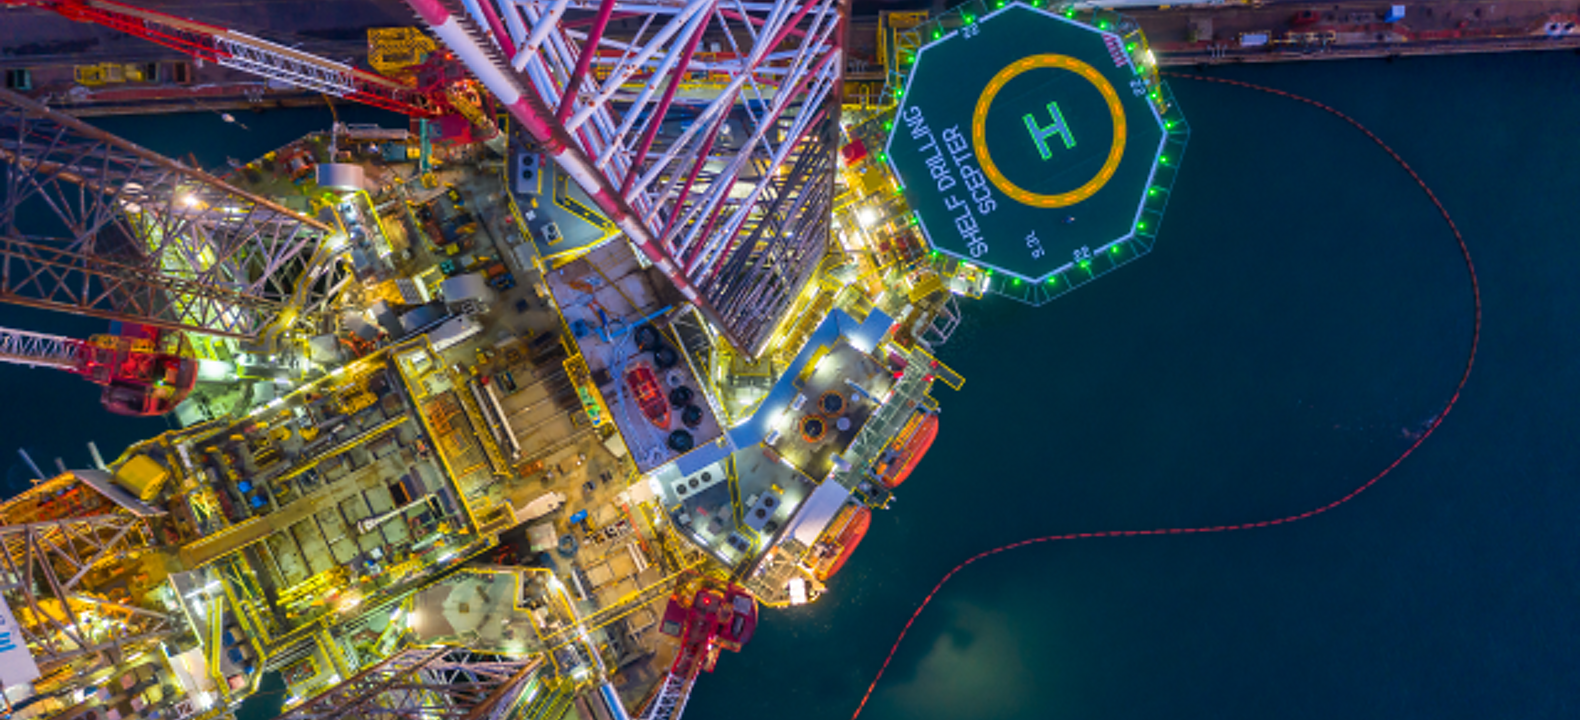 Aerial view of an offshore oil rig at night.